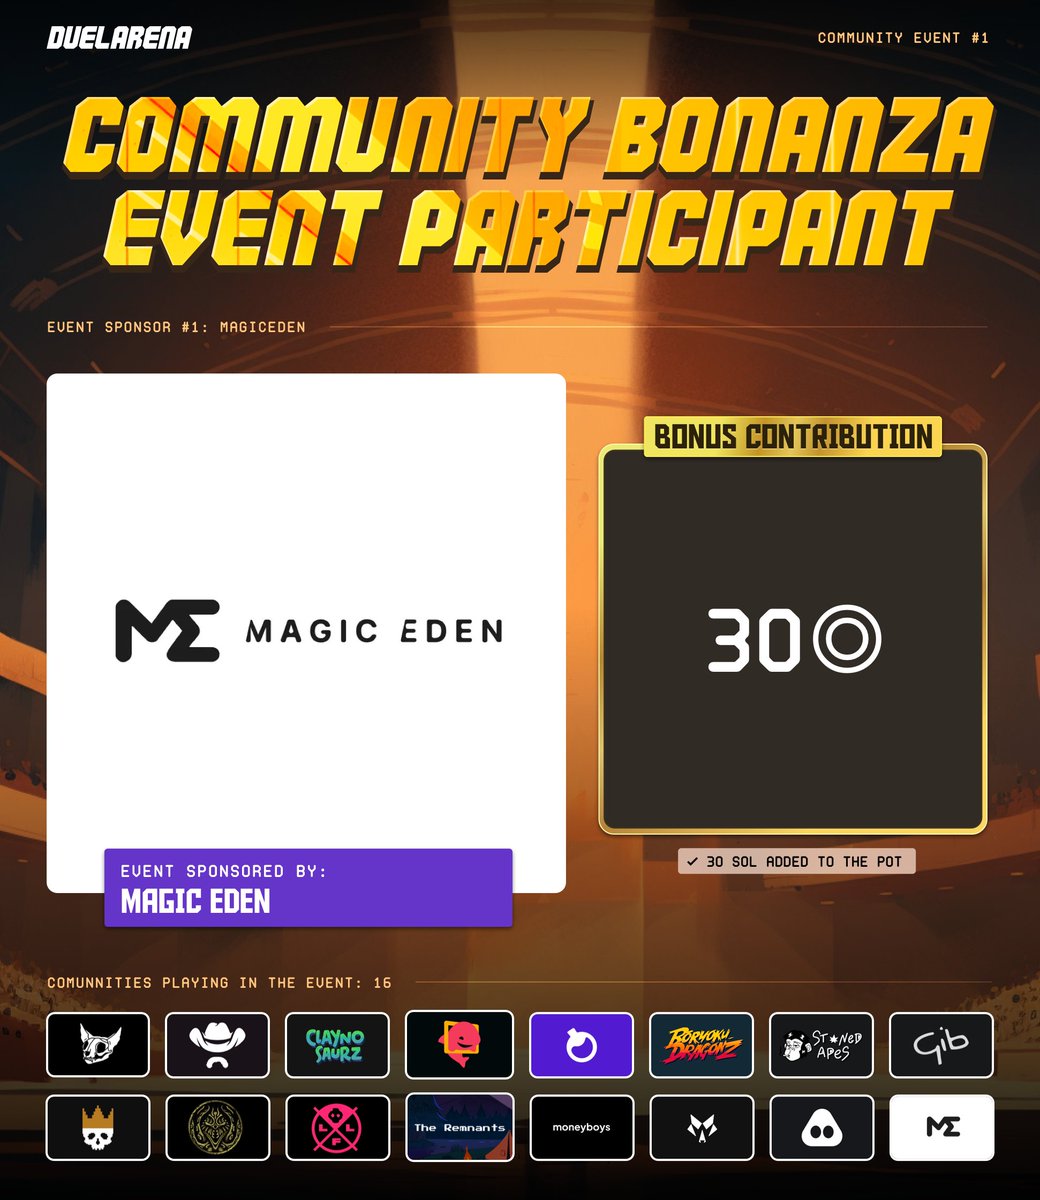 Announcing our final partner for tonights event, the biggest community event in #Solana history: @MagicEden. Magic Eden loved our idea and have chosen to add 30 SOL to the prize pool for tonights top 10 players of the event. More below 👇